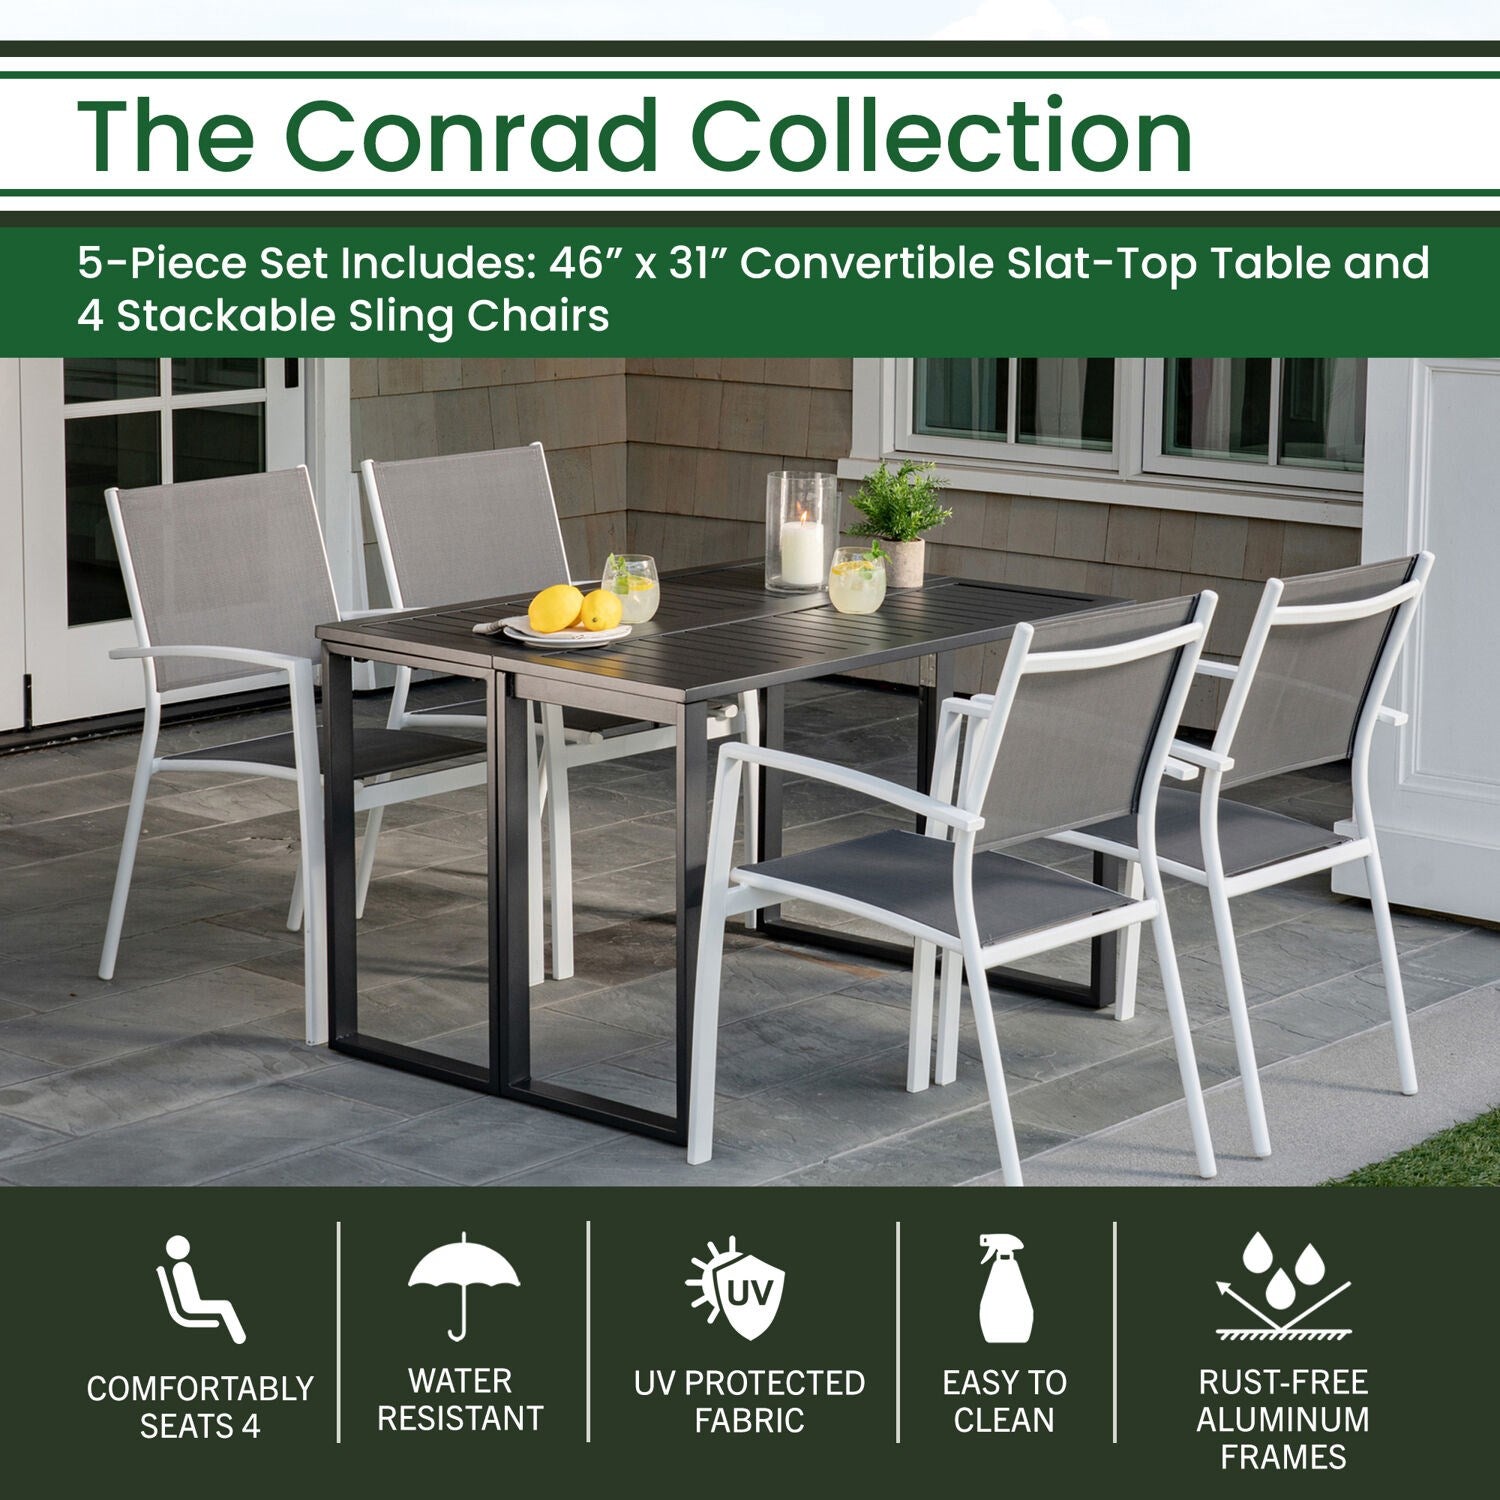 Conrad 5-Piece Compact Outdoor Dining Set w/ 4 Stackable Sling Chairs and Convertible Slatted Table, White Frame / Gray Sling CONDN5PC-WHT | CONDN5PC-WHT